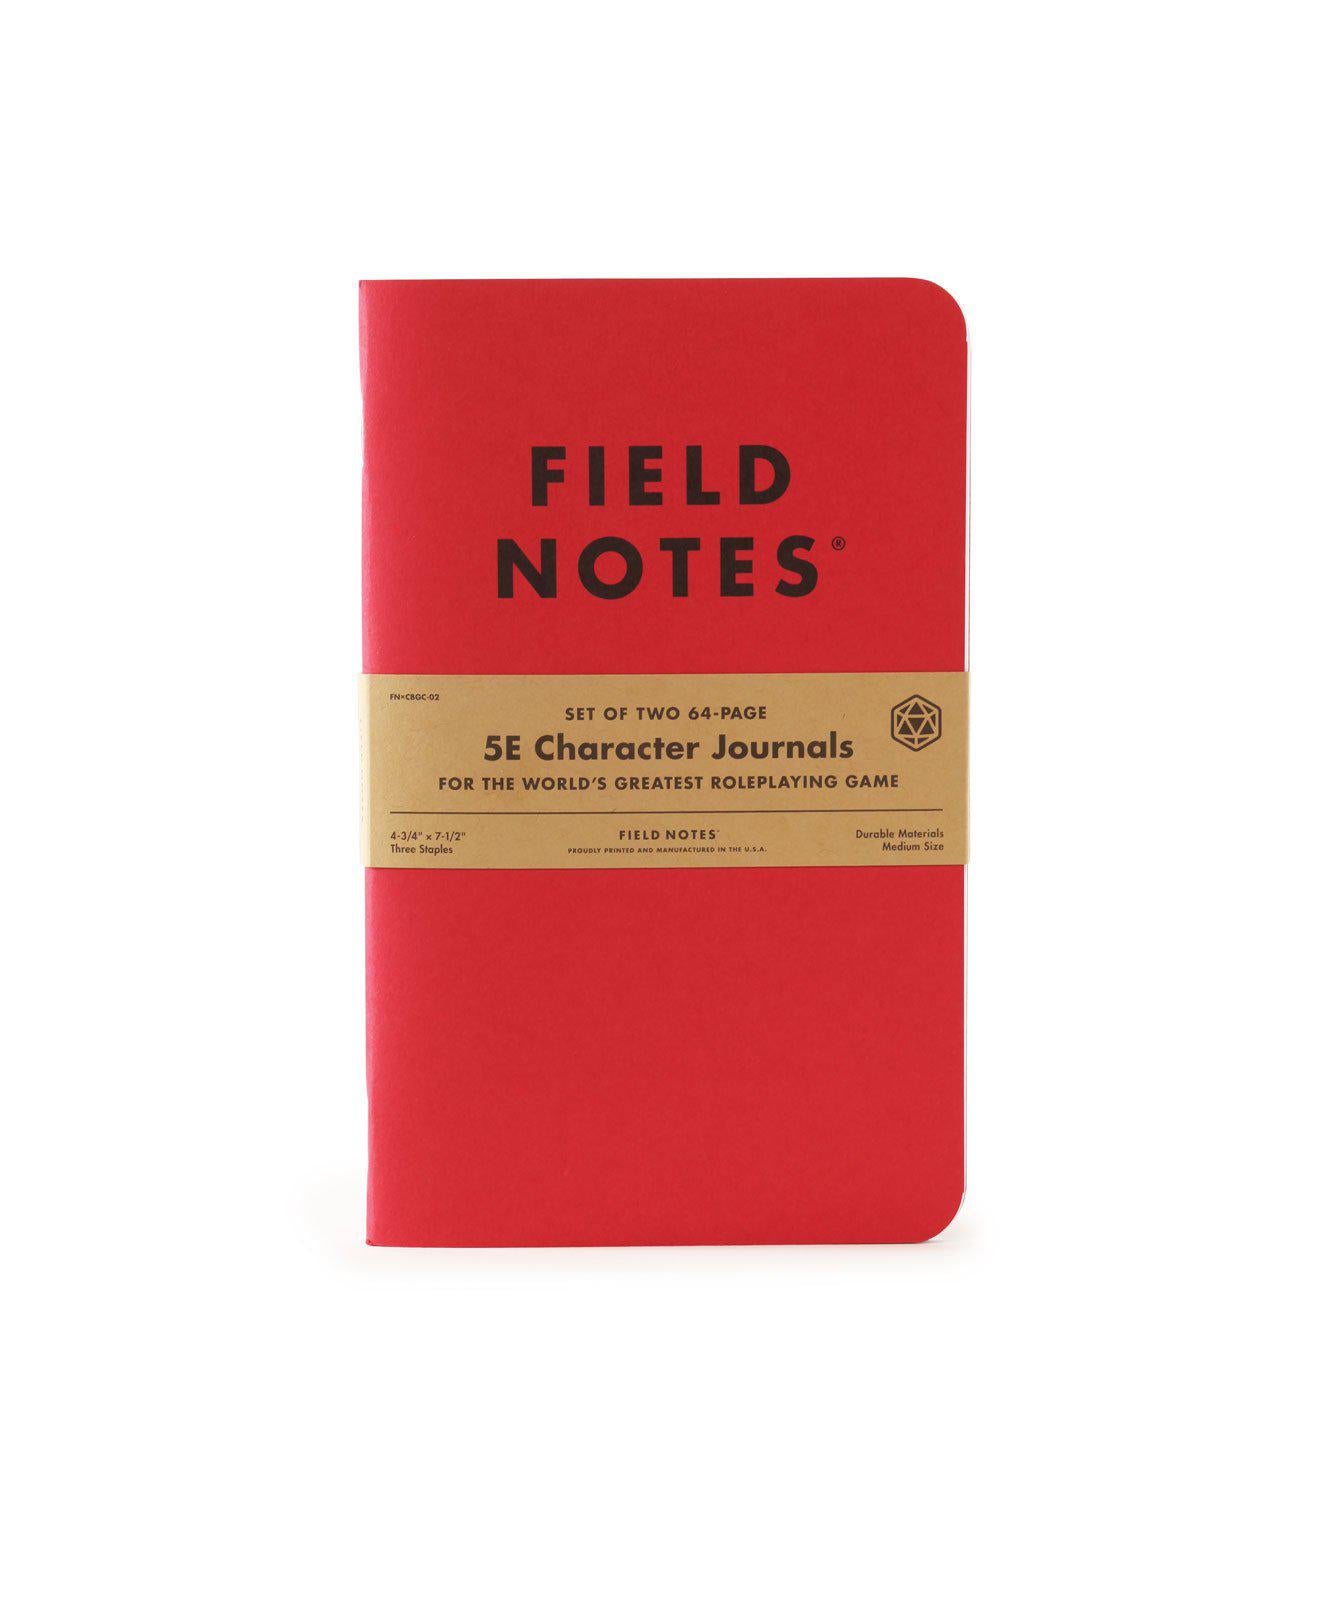 Field Notes 5e Character Journal